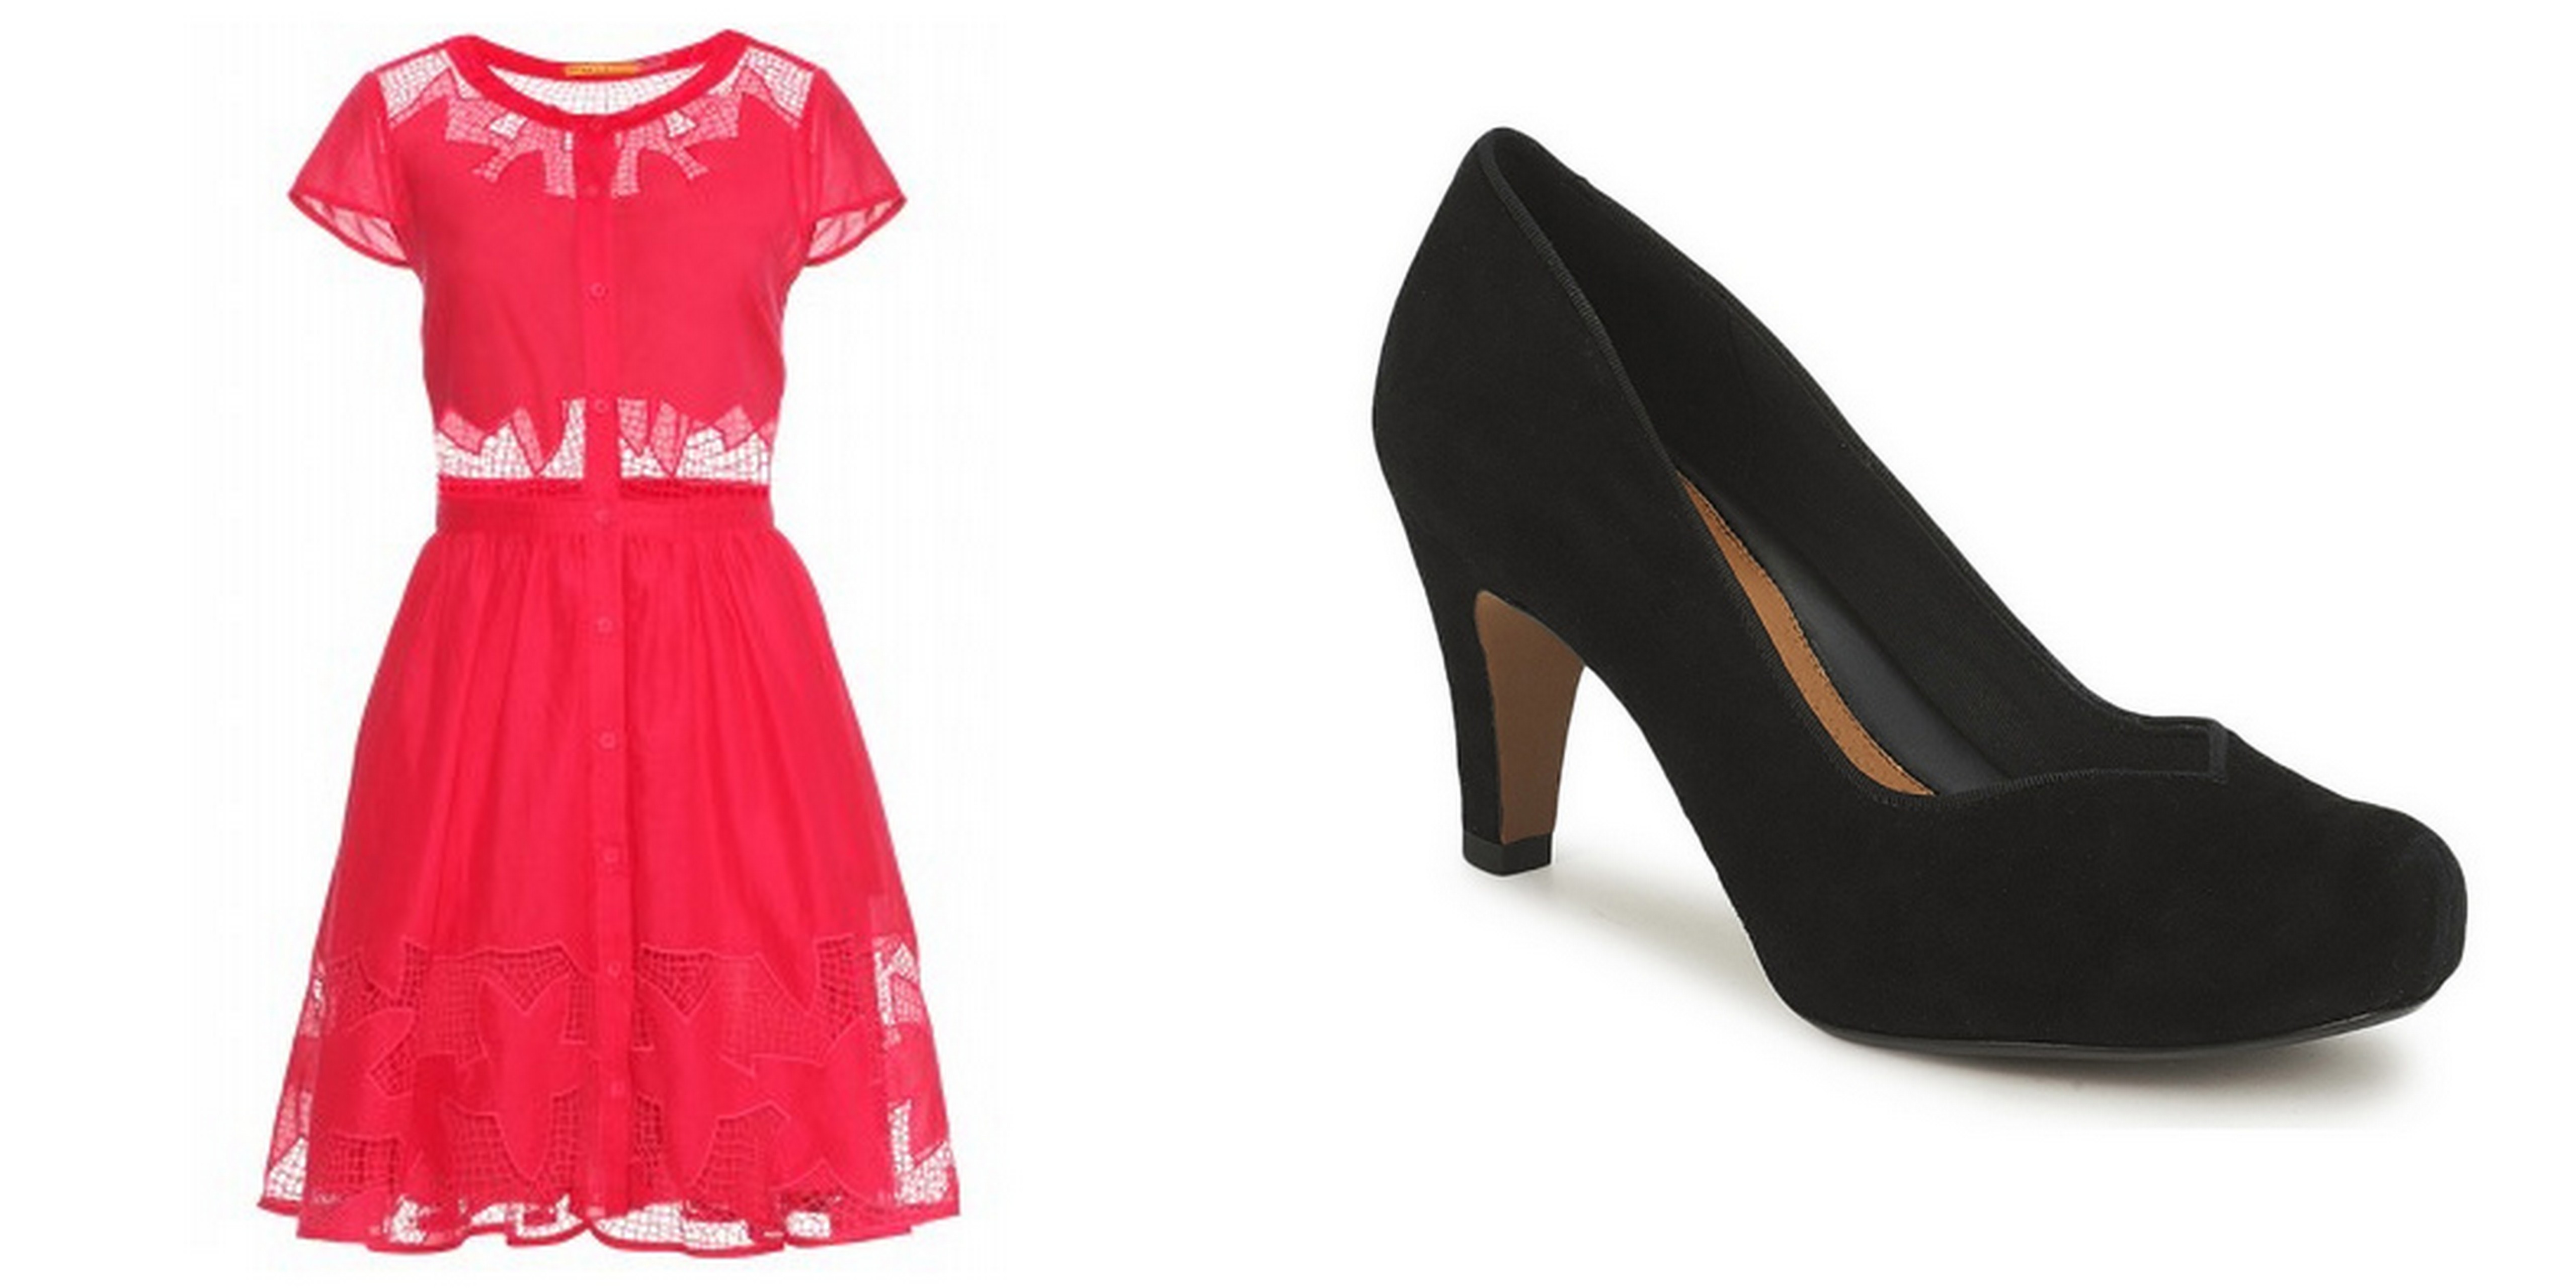 Alice and Oliva Dress and Clarks Shoes